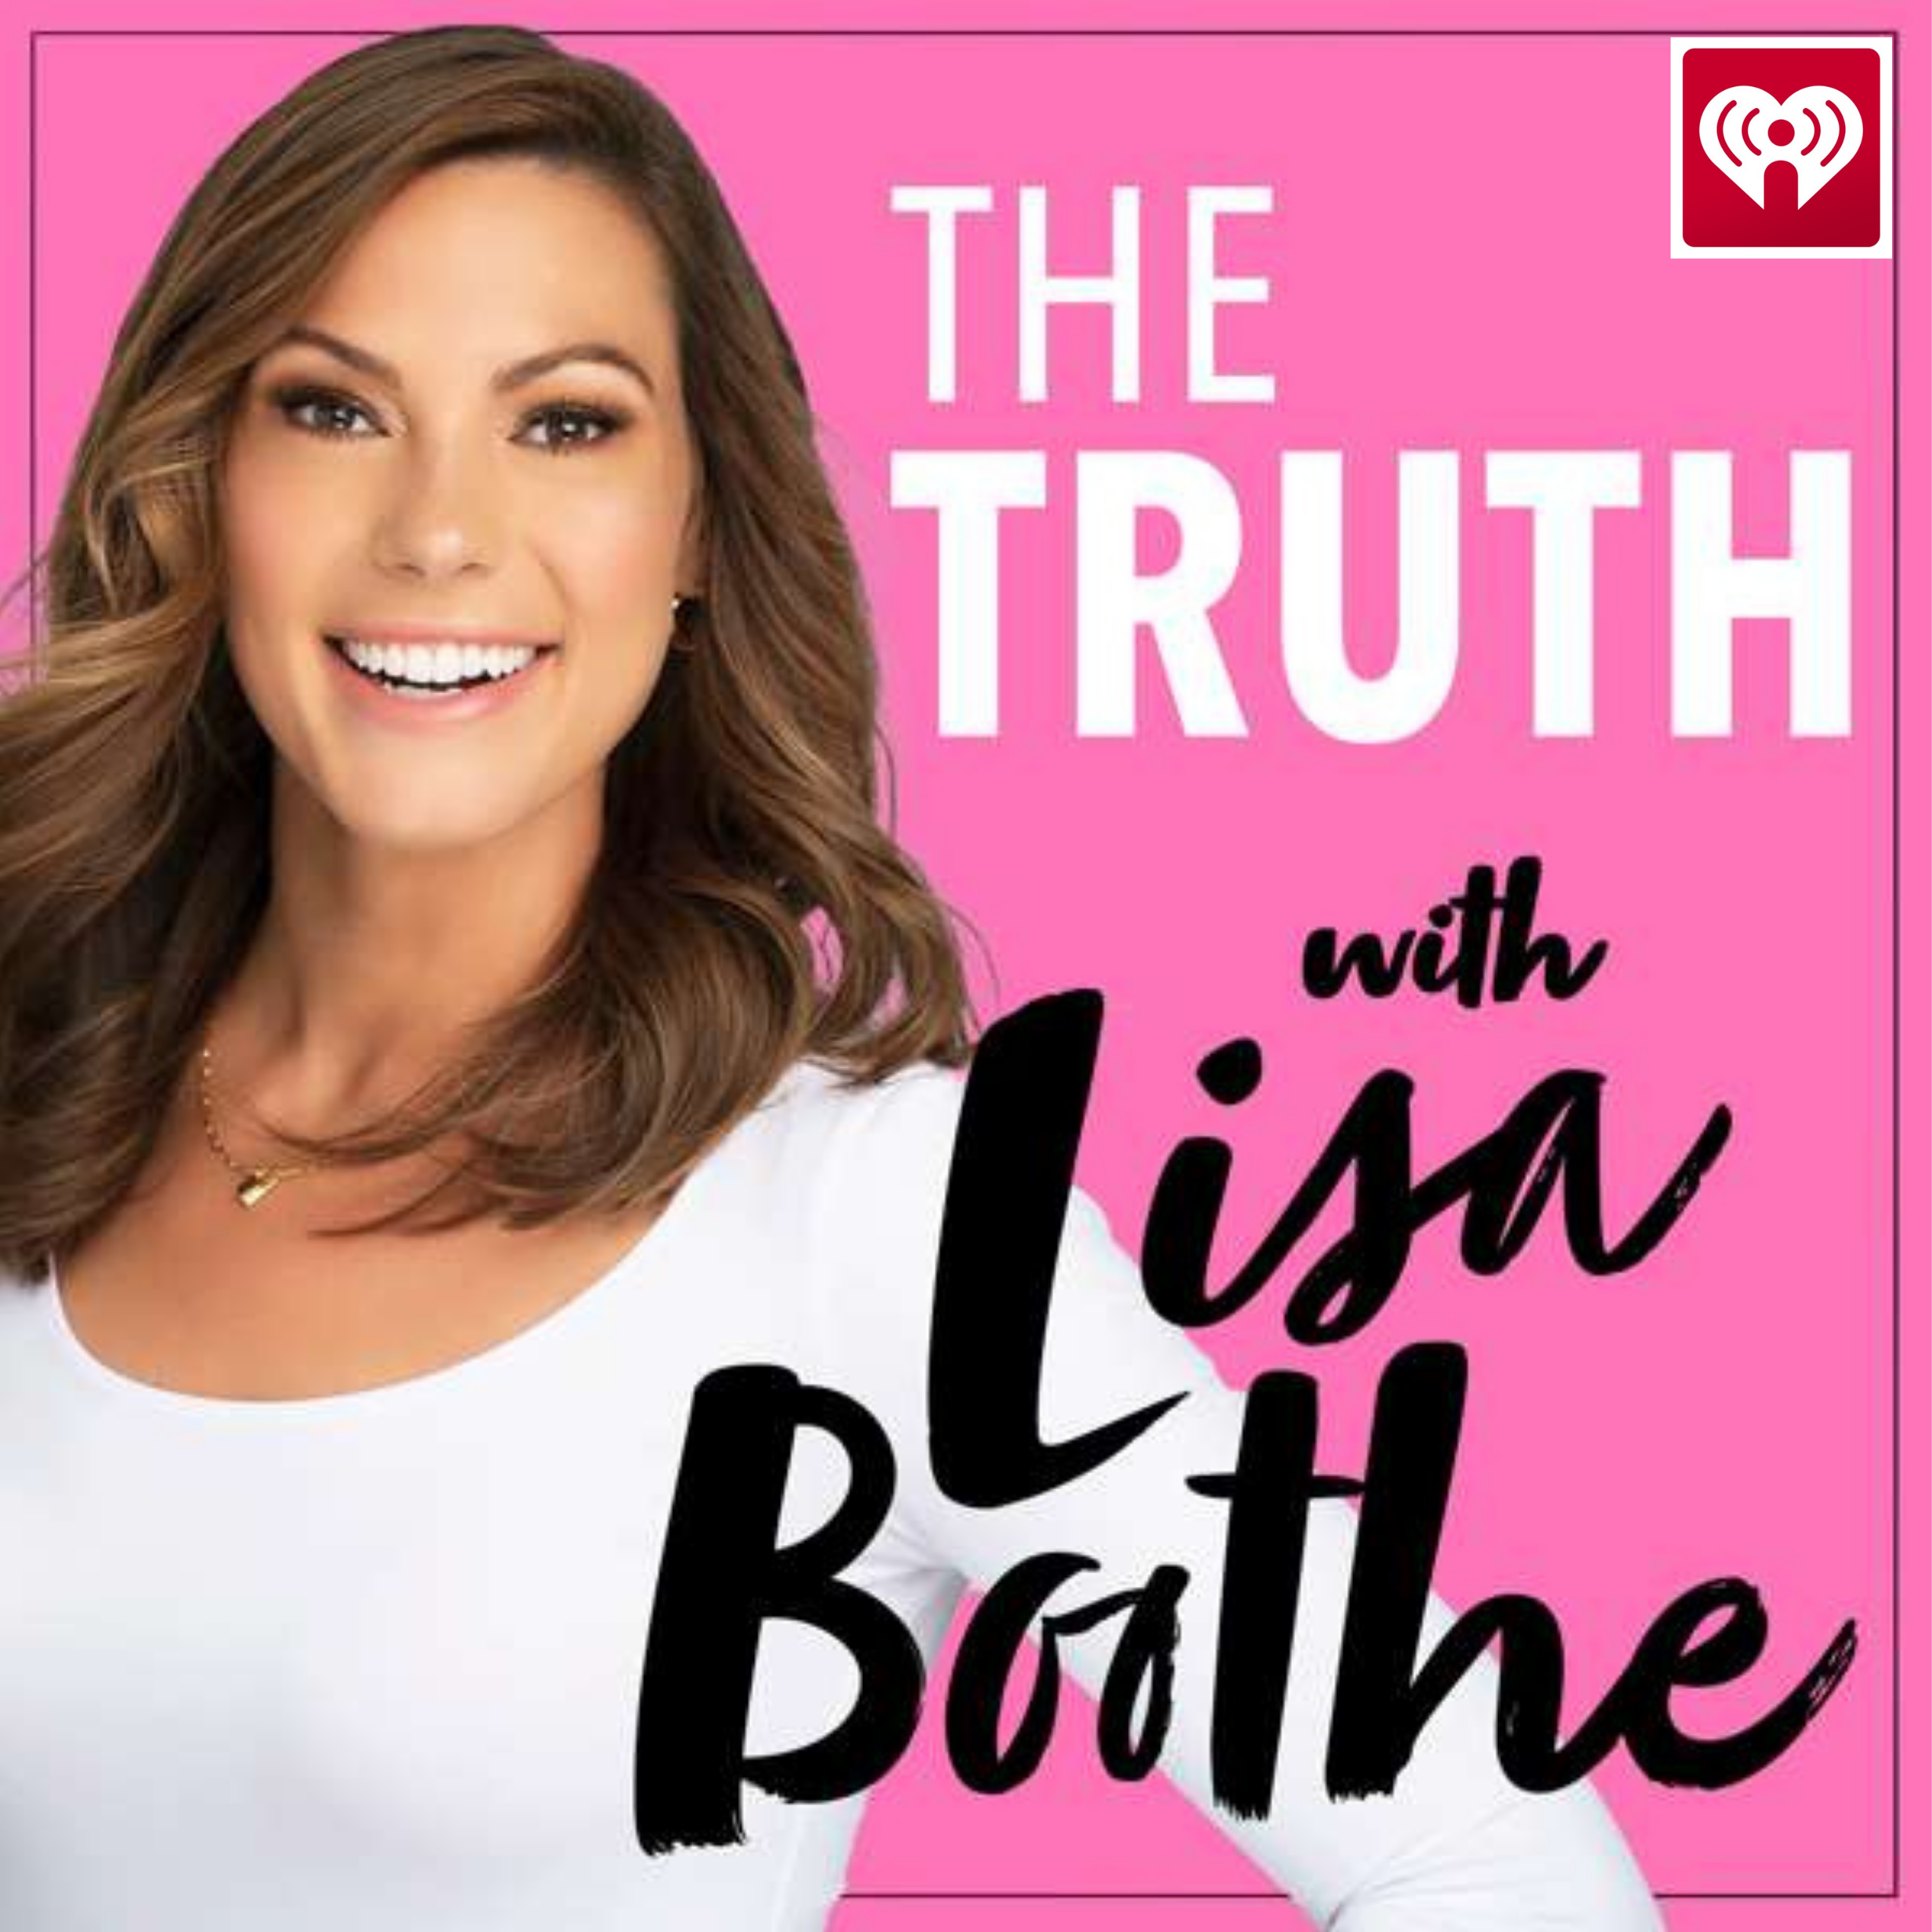 The Truth with Lisa Boothe: A Conversation with Senator Rand Paul